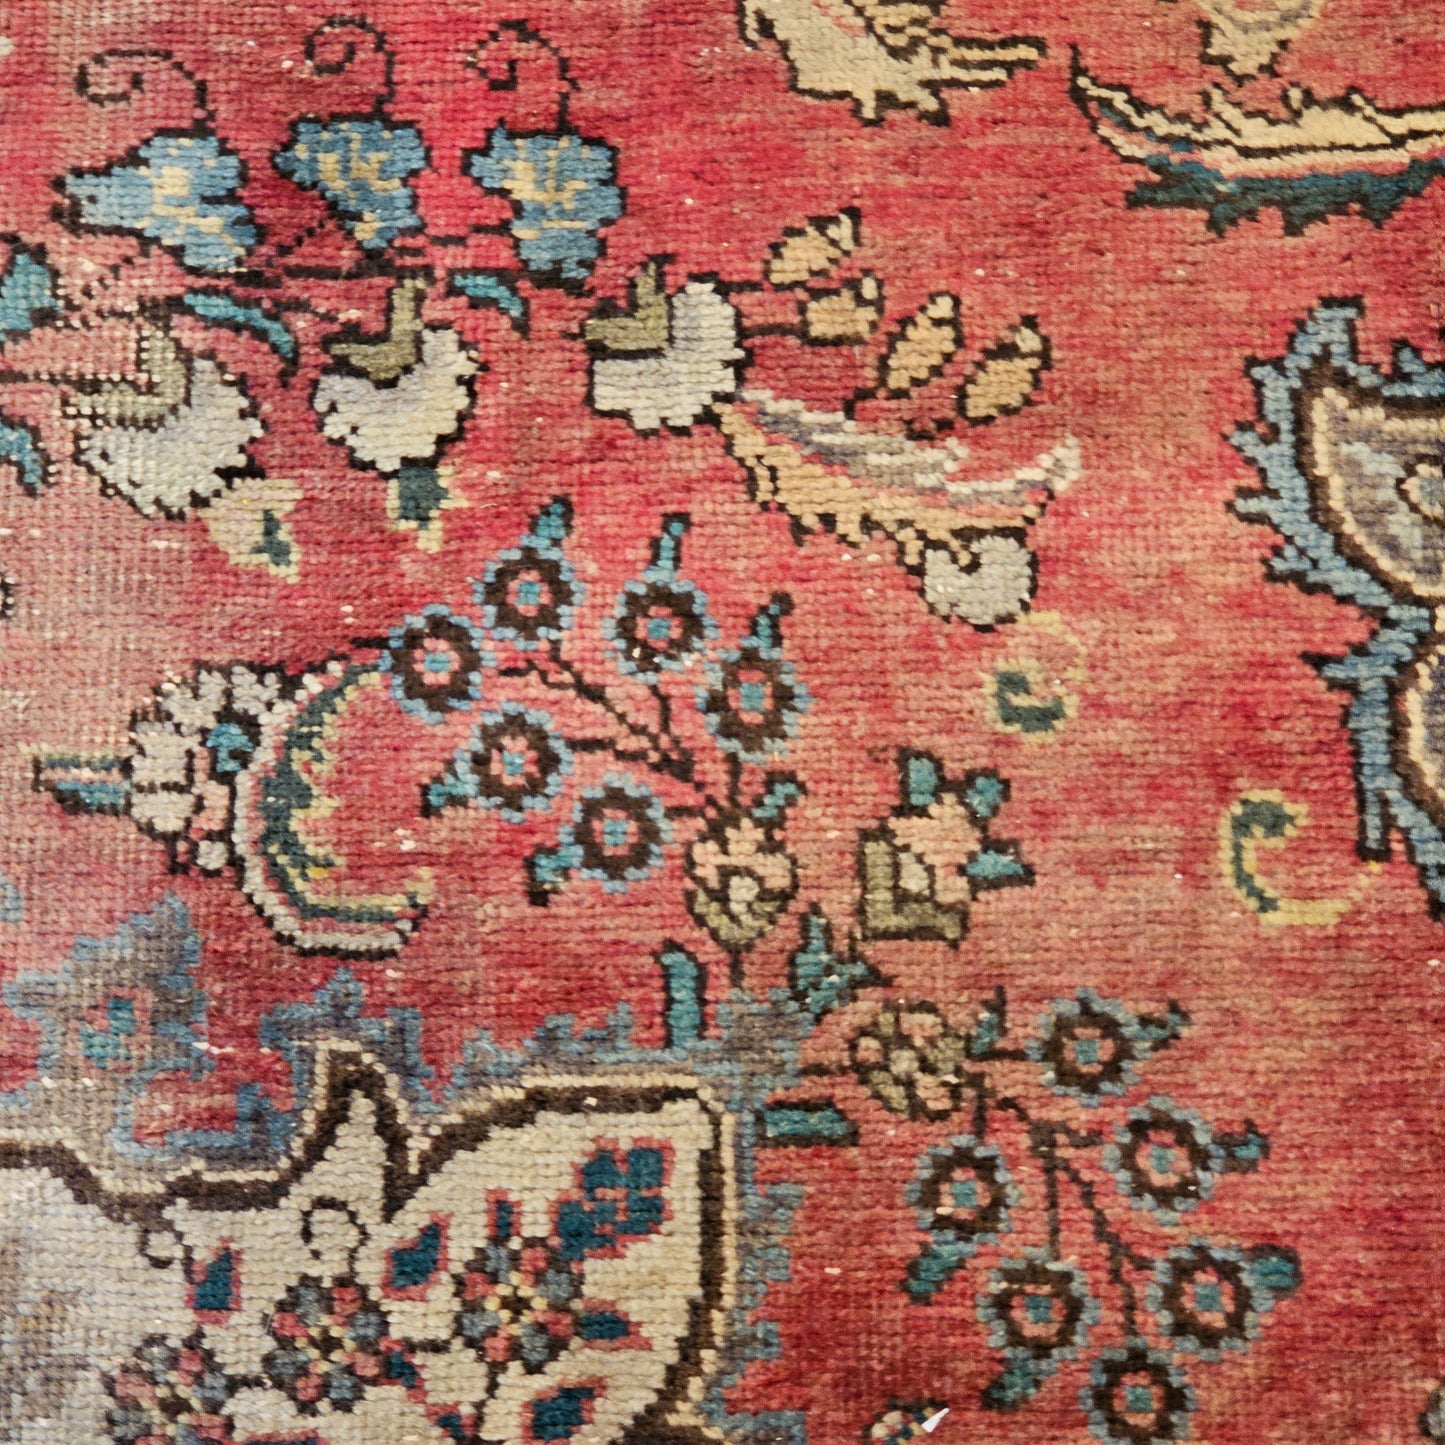 100% Wool Antique Hand Knotted Multi Colored Rug / Carpet ~ 6' 3" x 9' 6"